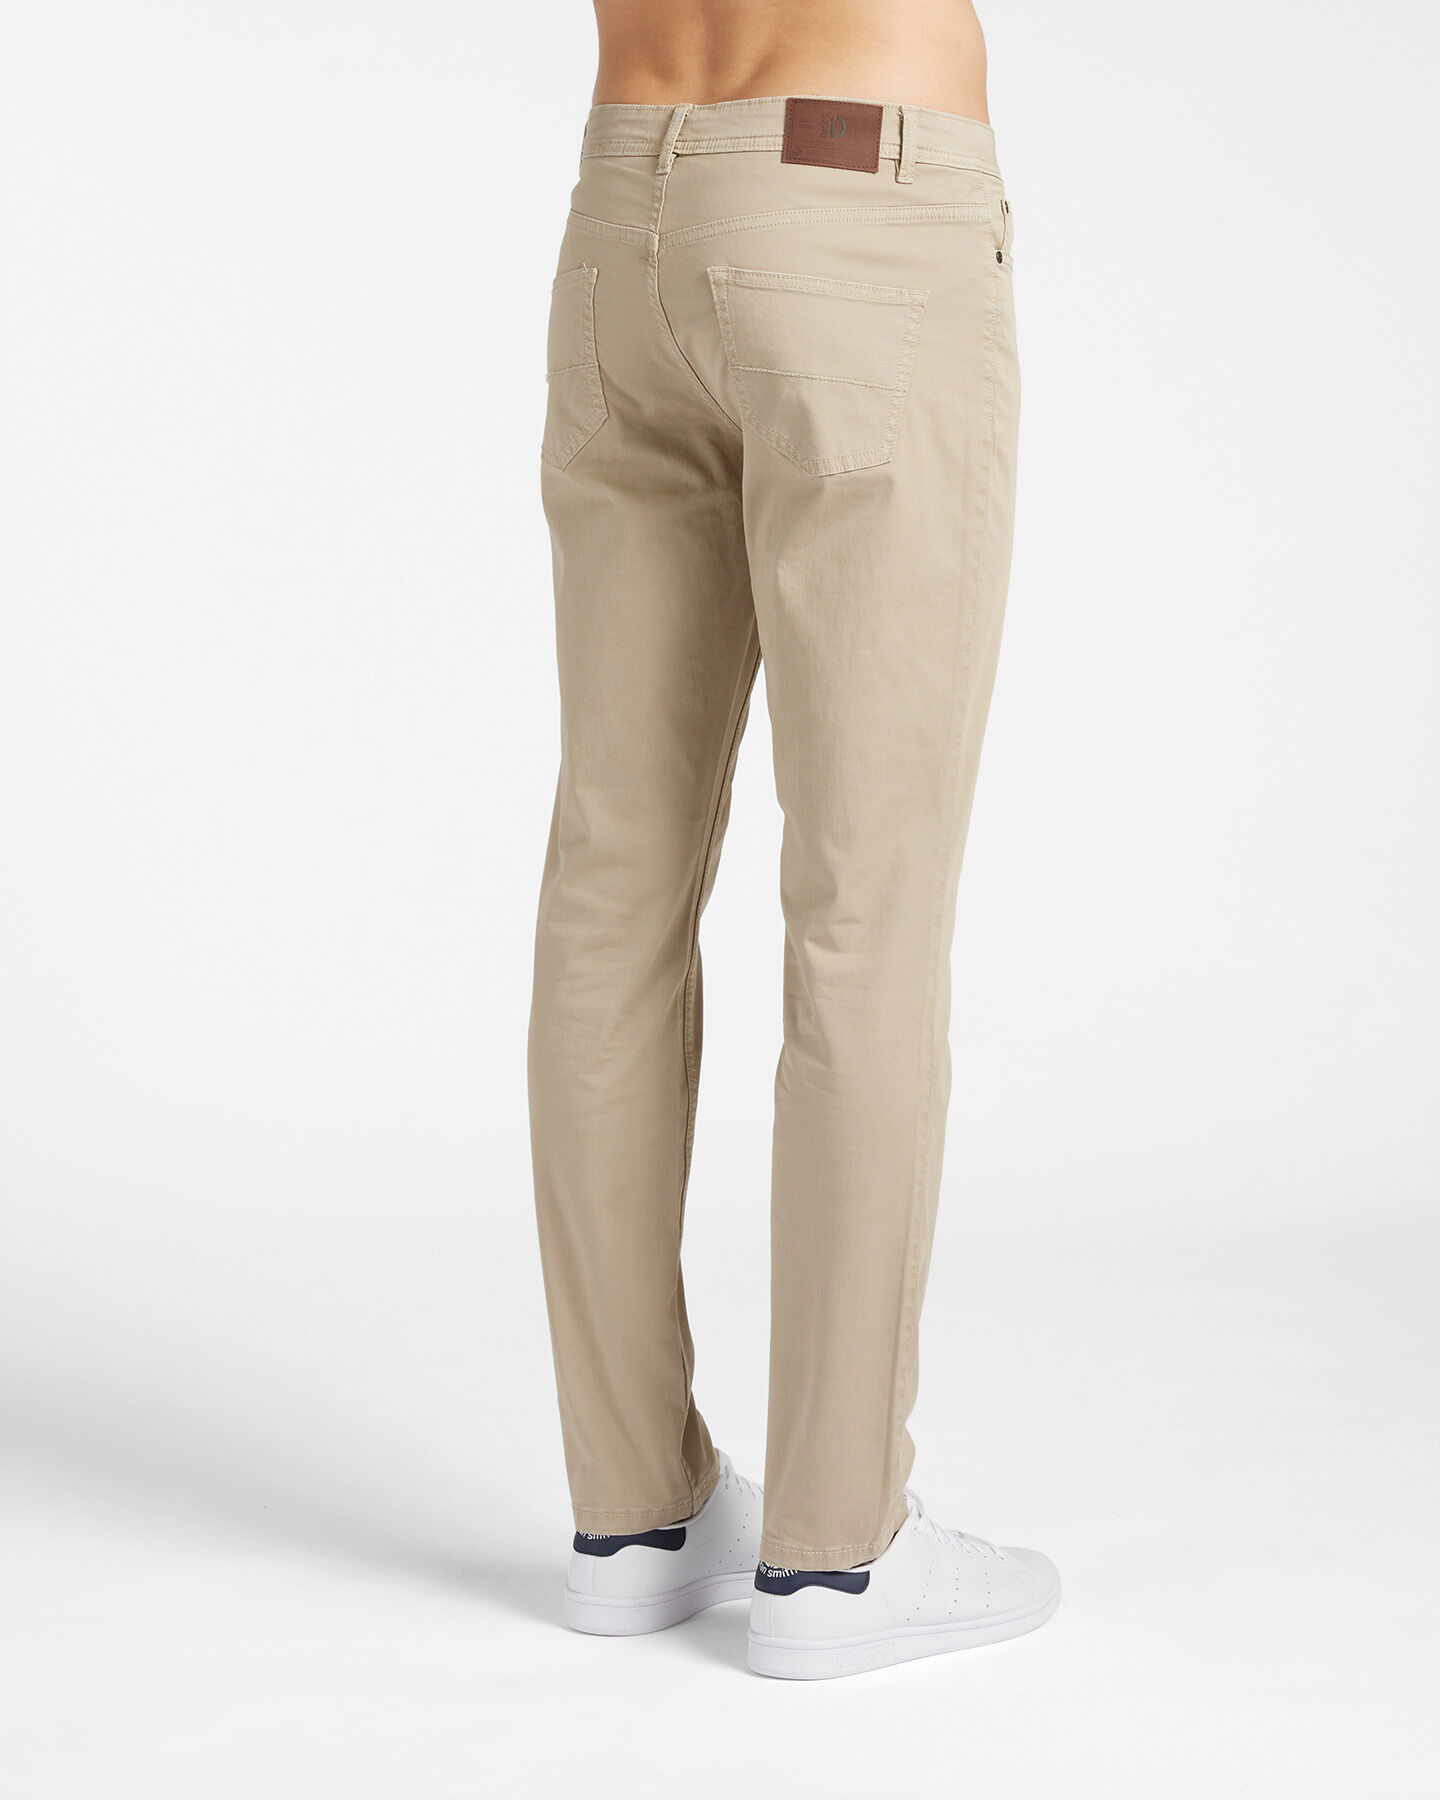  Pantalone DACK'S BASIC COLLECTION M S4118684|1129|44 scatto 1